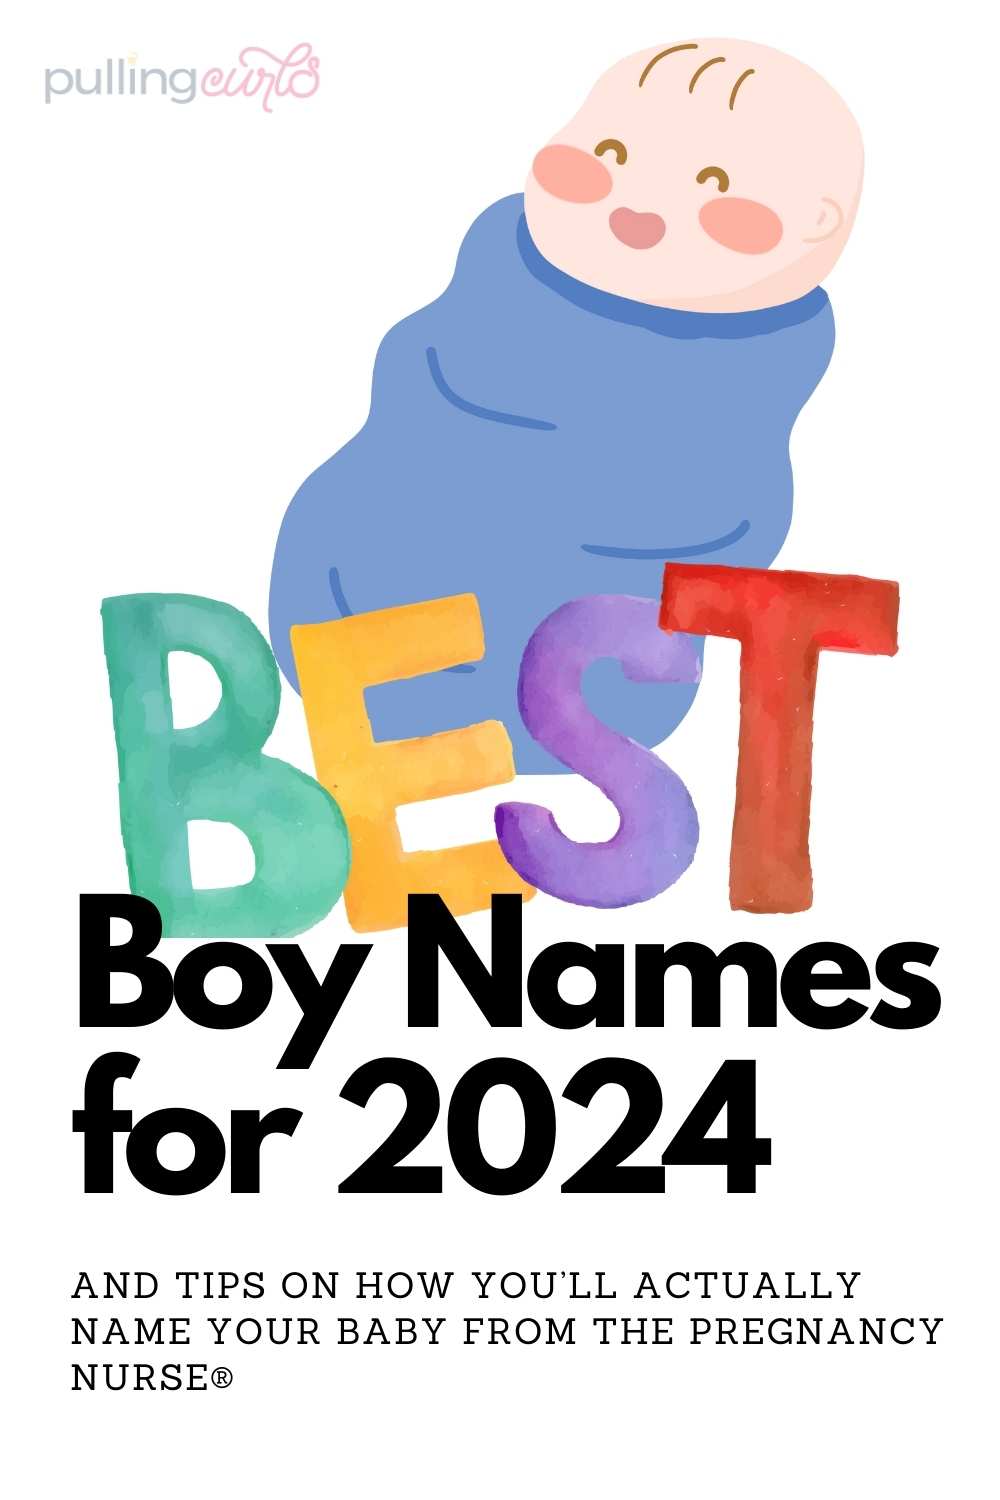 Welcome to the world of baby boy names! From timeless classics to modern gems, we're here to help you find the perfect name for your little prince. Explore our list of carefully curated names and discover inspiration from all corners of the globe. Let your baby boy's name reflect your unique taste, heritage, and dreams for their future. via @pullingcurls